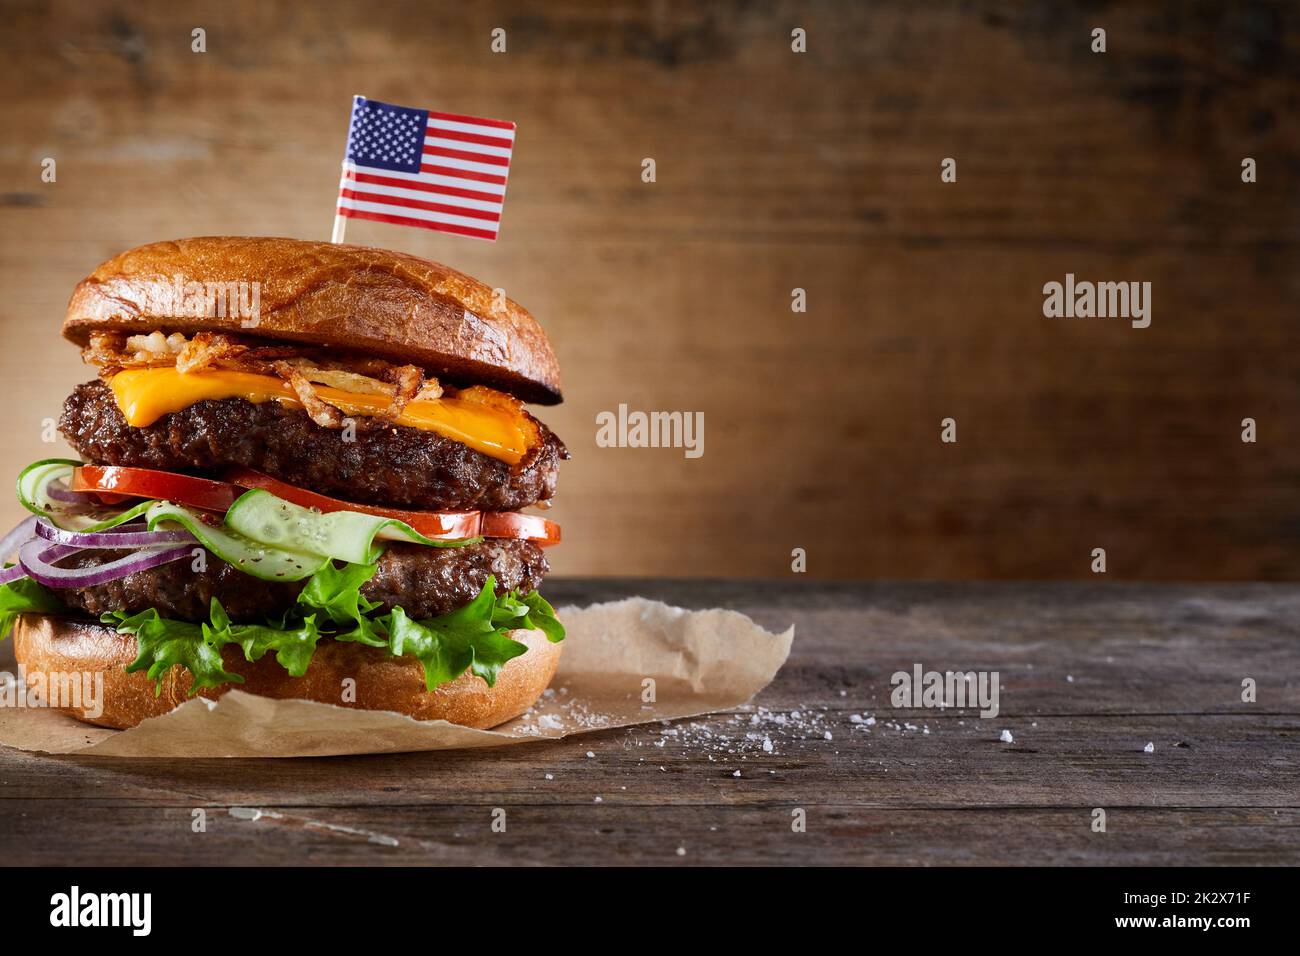 Burger with American flag skewer on table Stock Photo